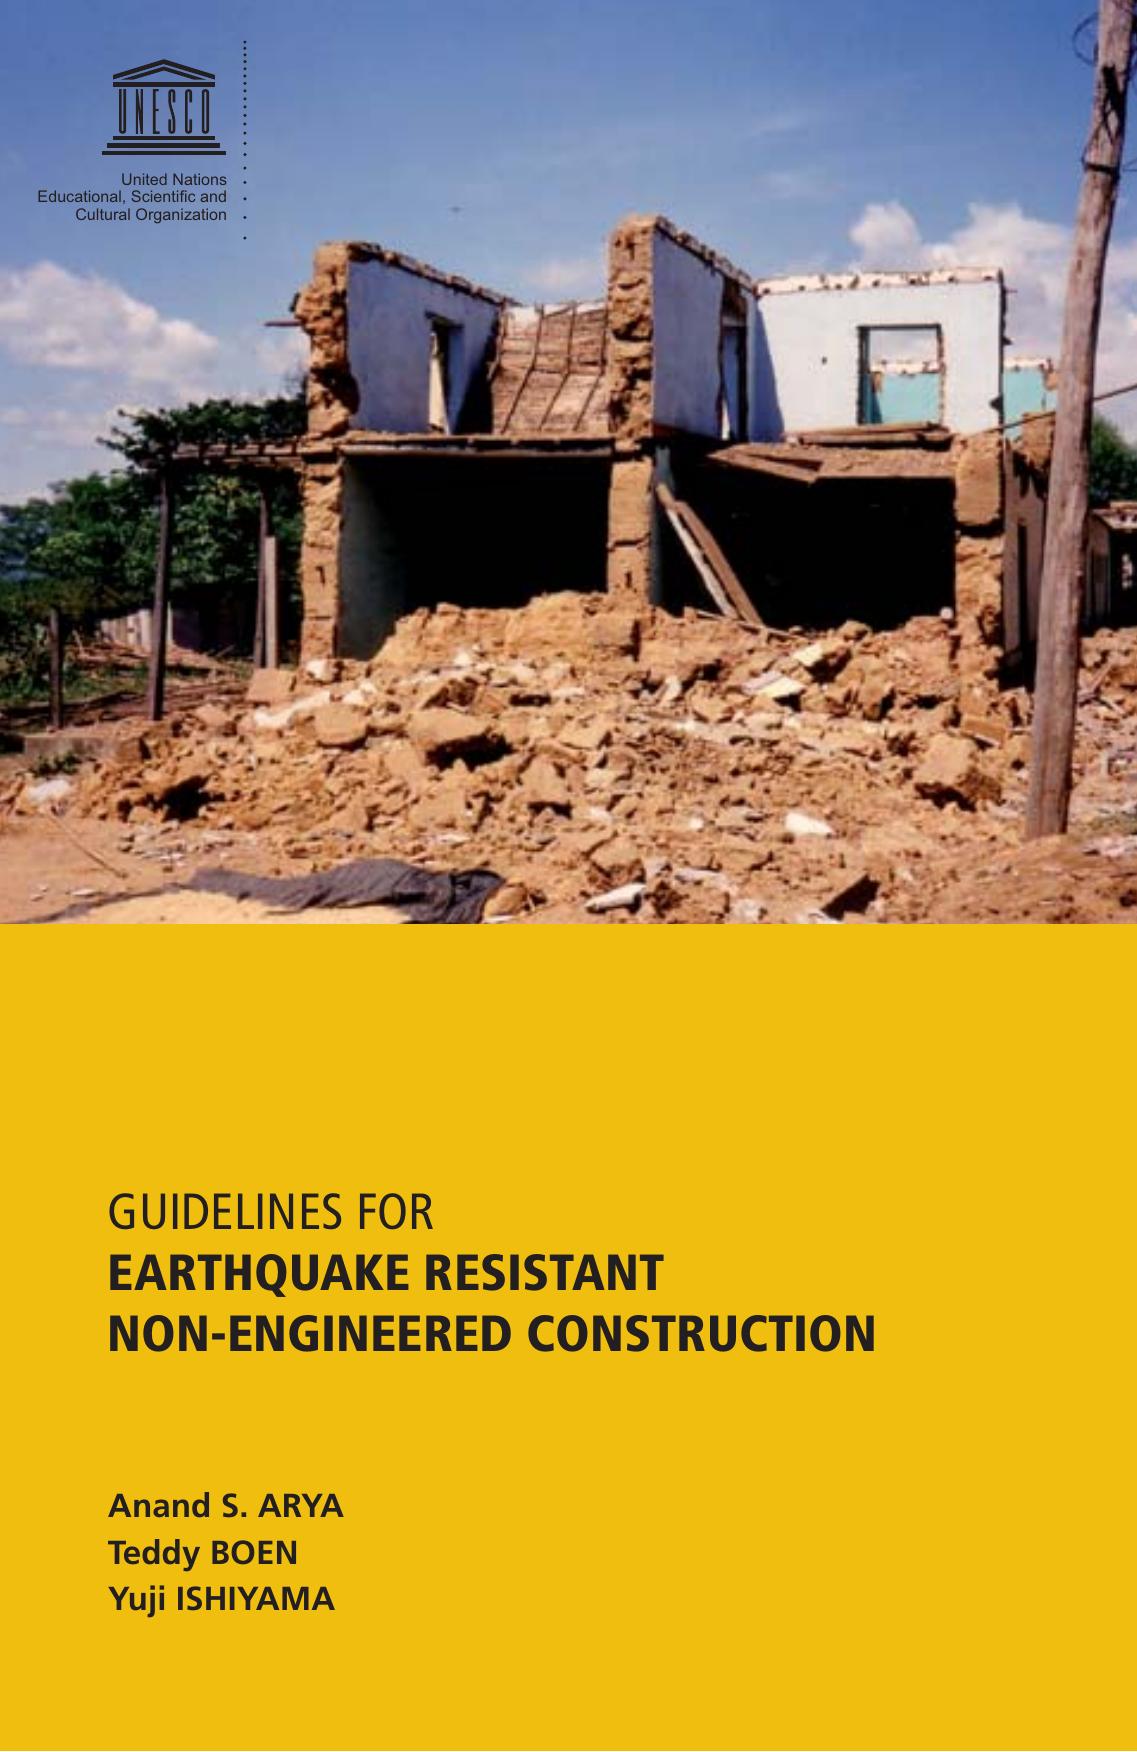 Guidelines For Earthquake Resistant Construction